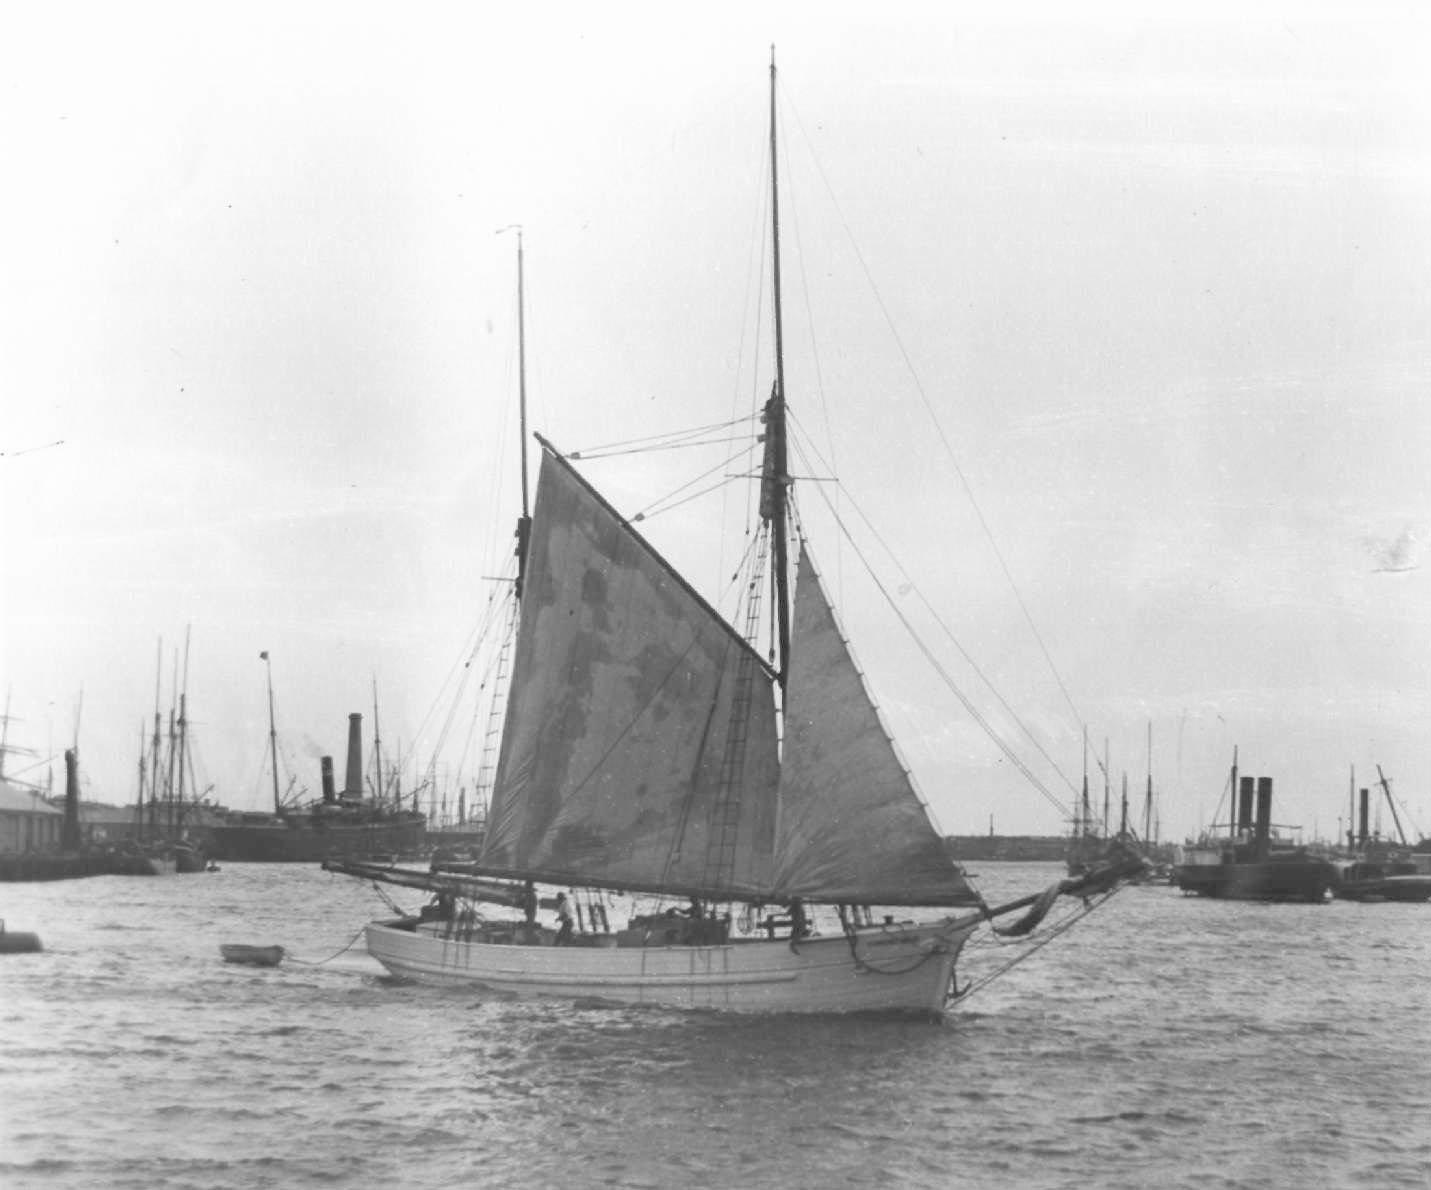 Ketch "Florence Maud", a wooden 2 masted vessel built in 1887 by Thomas Bennet, Snr, at Swan Point, River Tamar, Tas.  In February 1900 she was first registered at Port Adelaide by W.J. Spells & R. Fricker.  In 1920 she was registered to G. Anderson and i